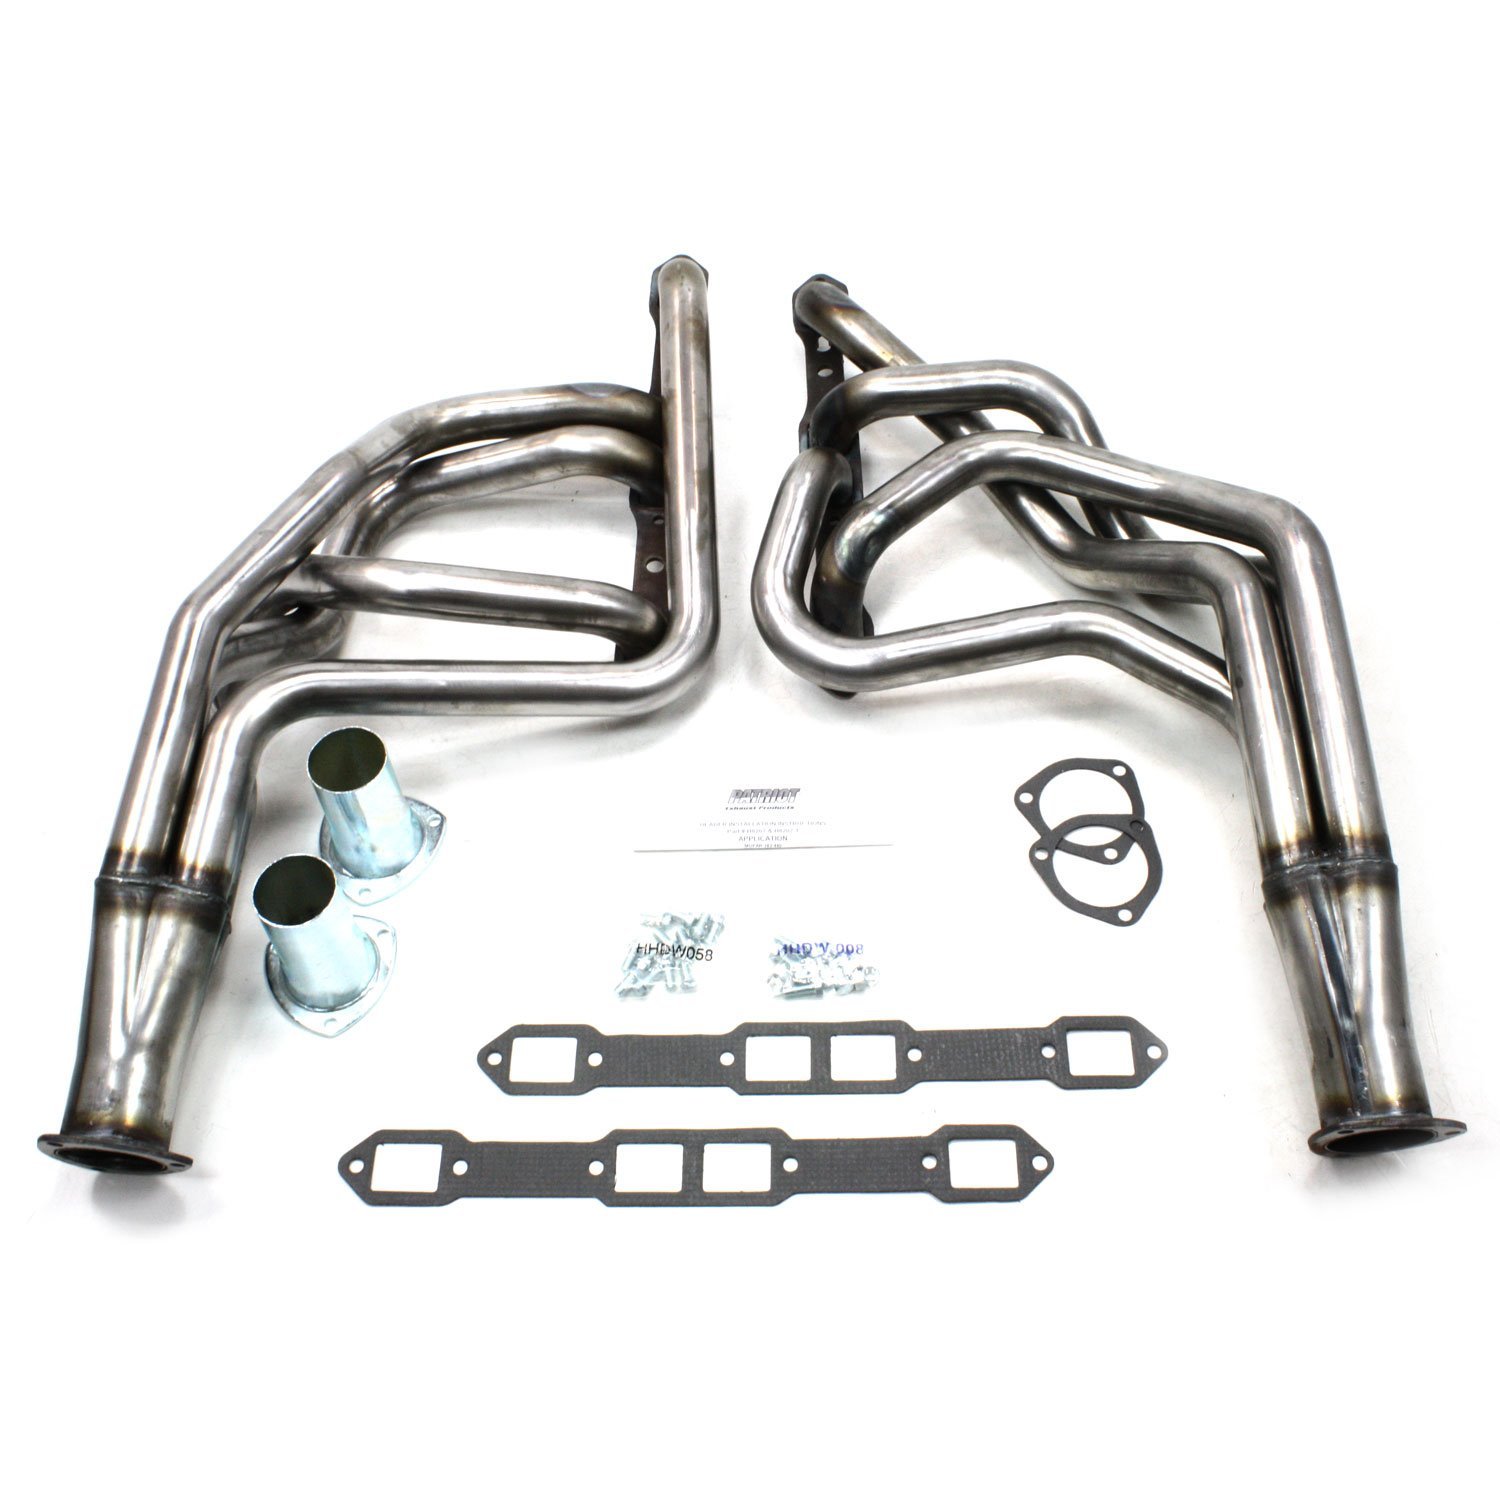 Dodge/Plymouth Specific Fit Headers 1967-1974 B & E Bodies